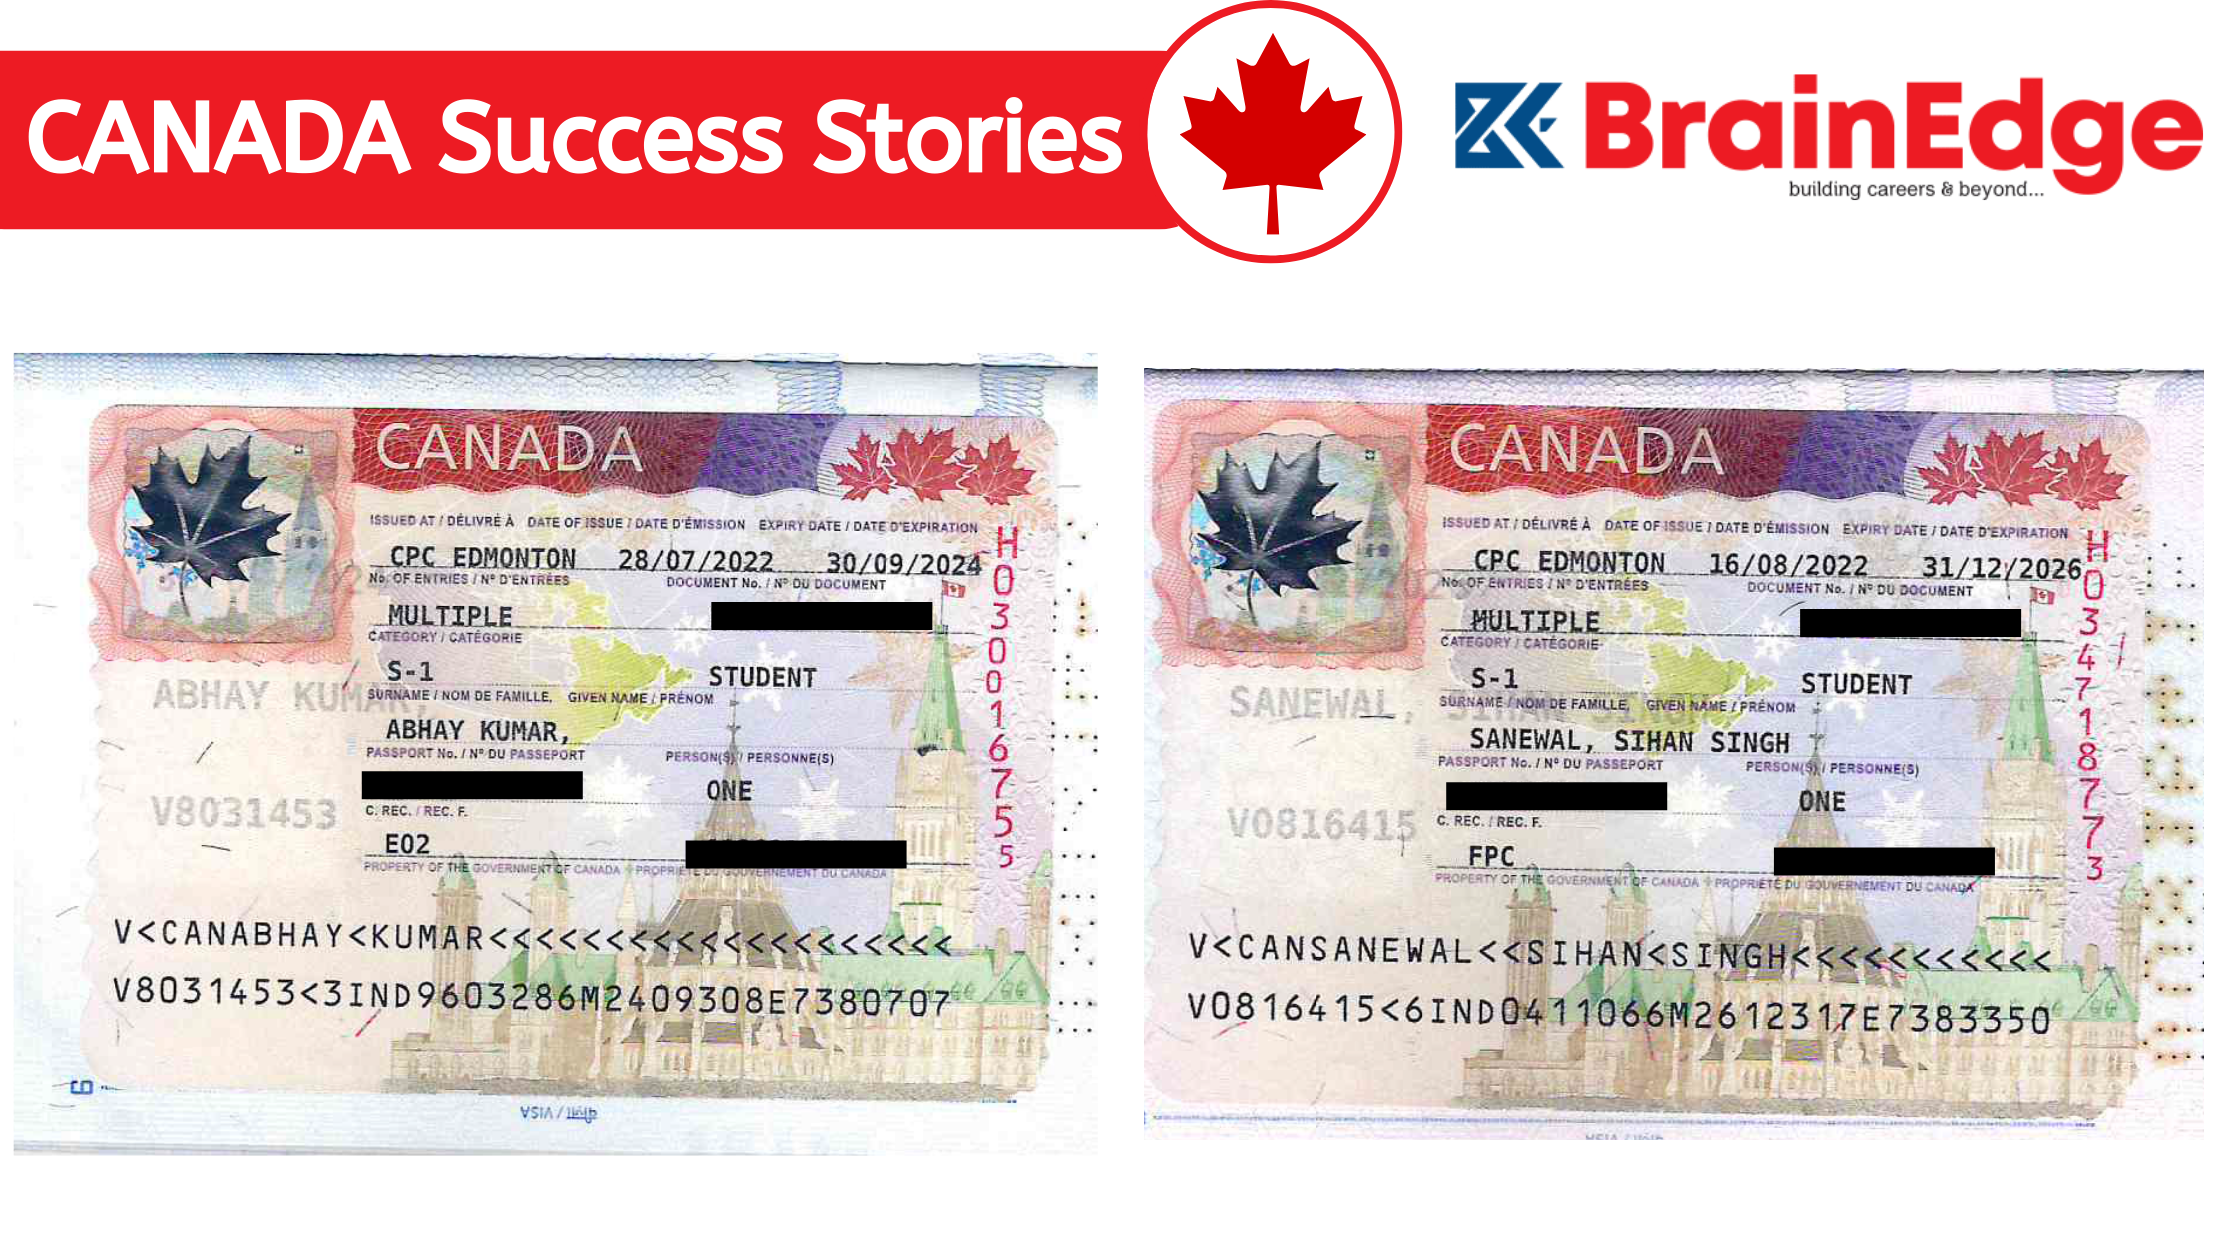 This image showcases the Canada success stories of BrainEdge with visa stamps as evidence, depicting the achievements and journey of our students.